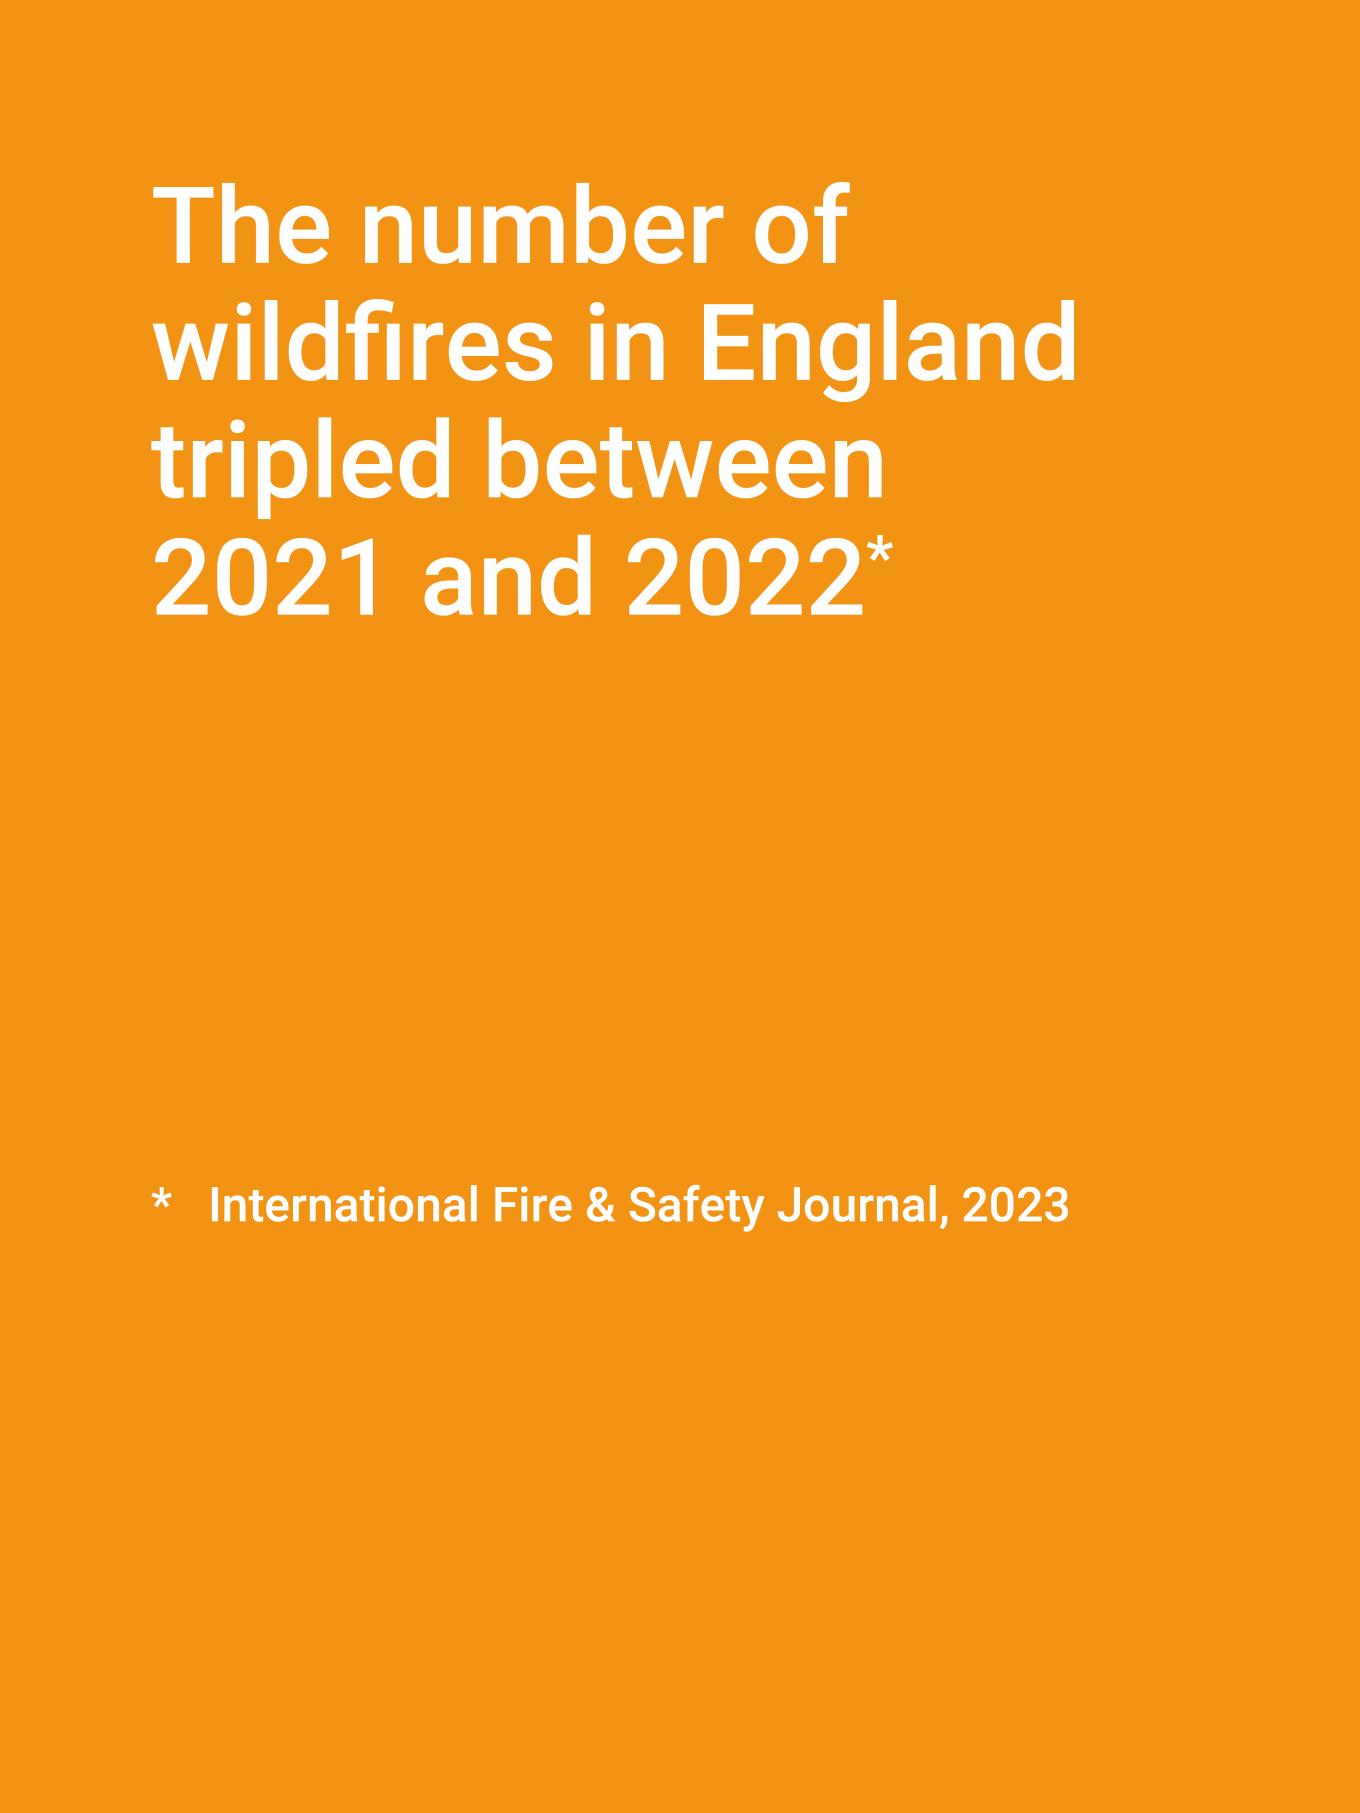 Increase in wildfires in England